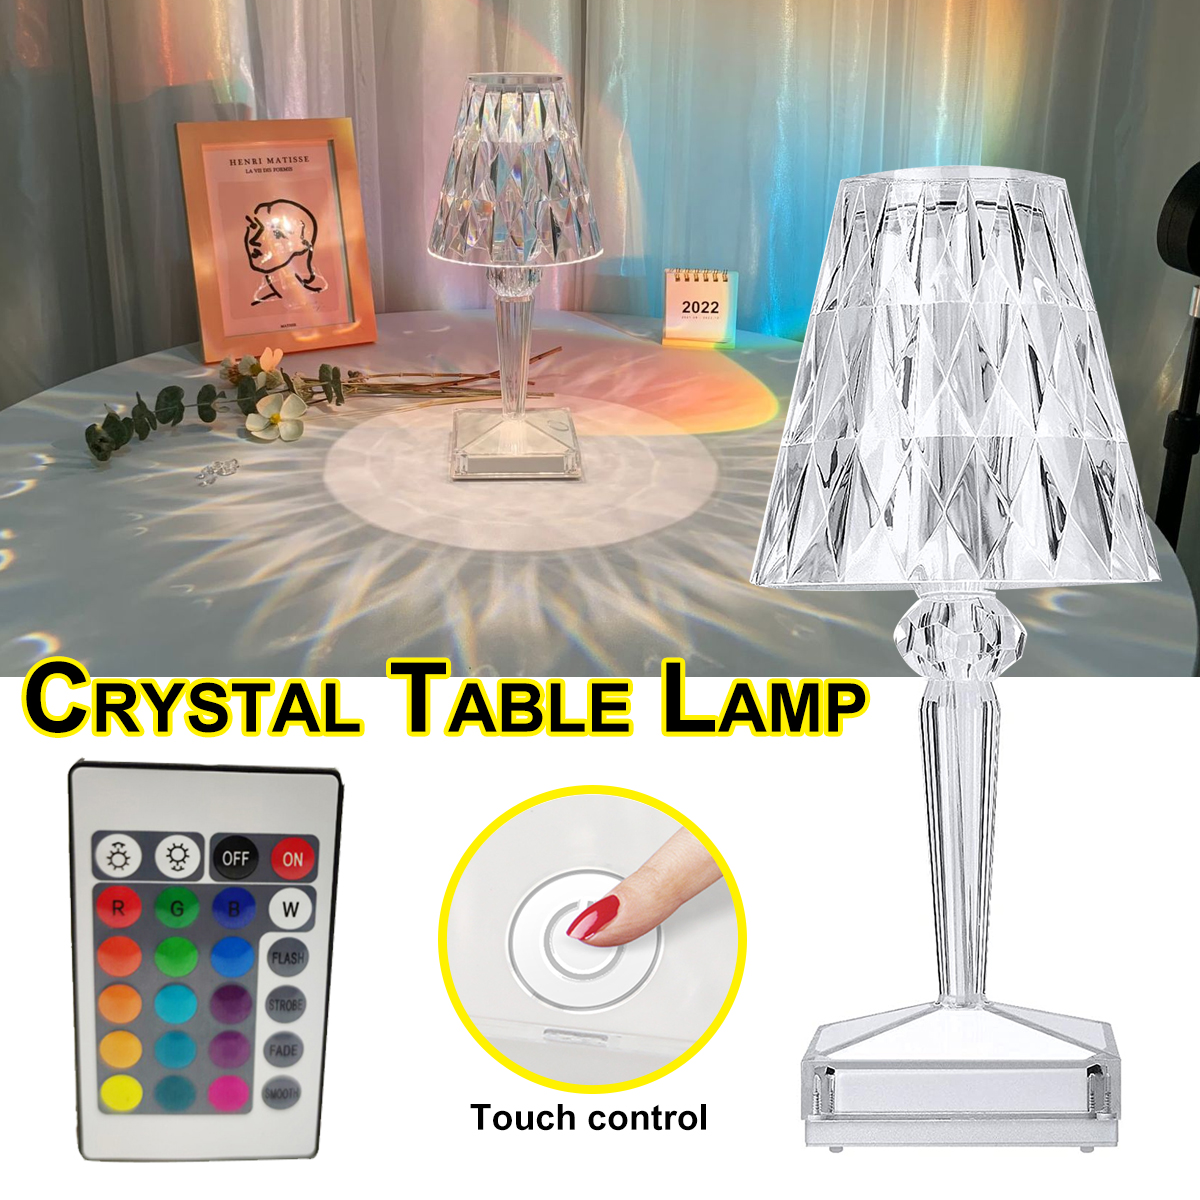 Diamond-Crystal-USB-Charging-Desk-Lamp-Acrylic-Touch-type-Stepless-Dimming-Desk-Lamp-RGB-Remote-Cont-1916731-1